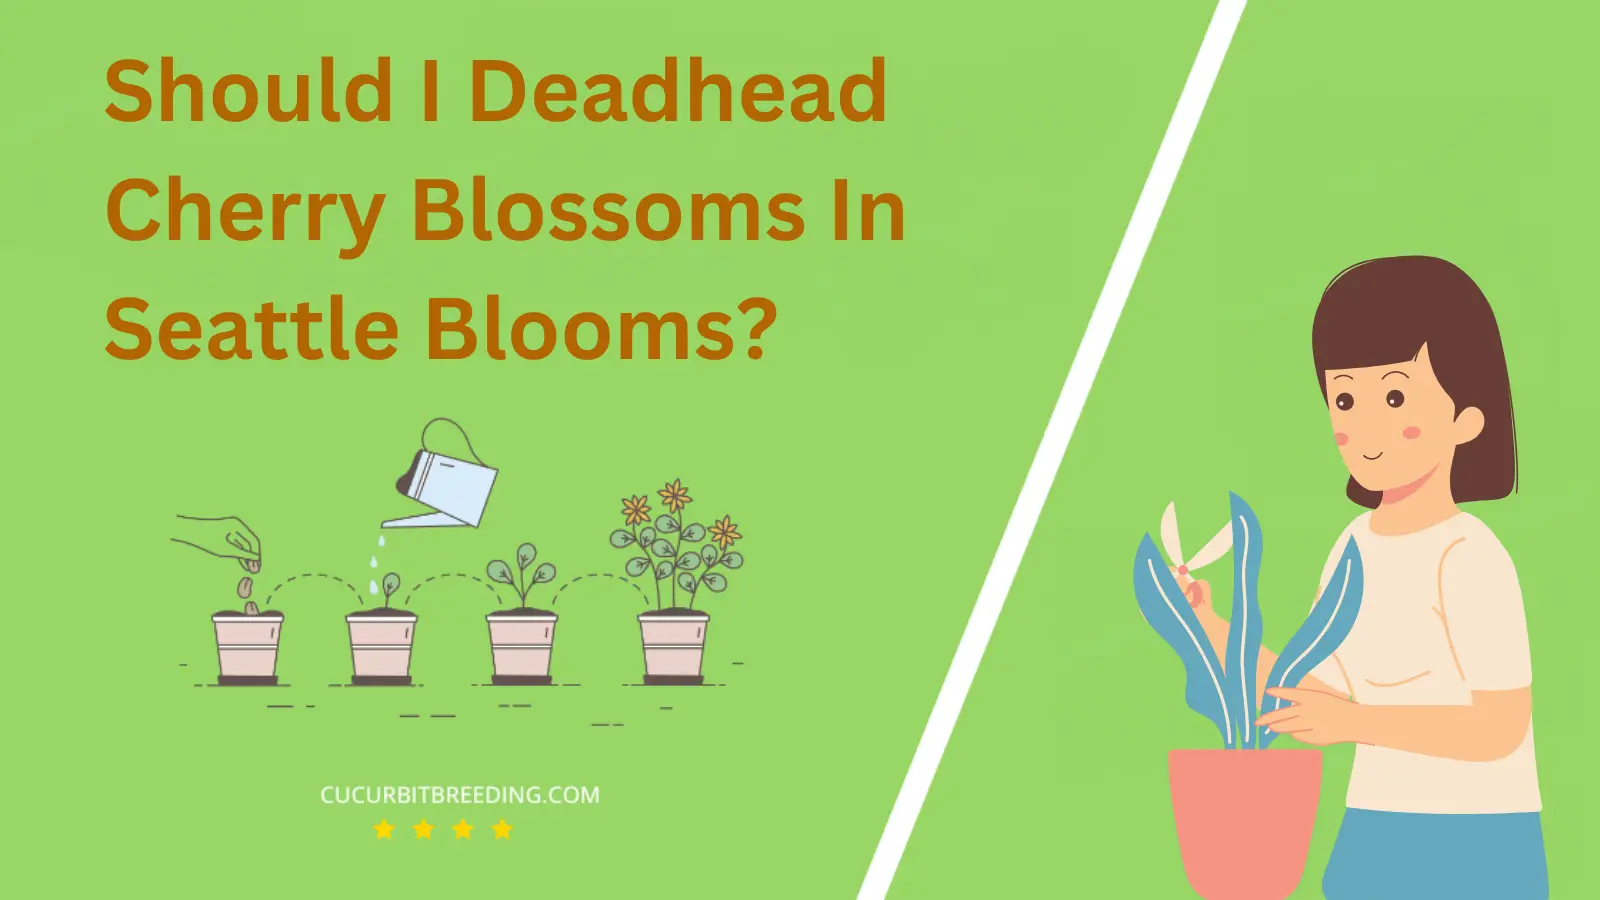 Should I Deadhead Cherry Blossoms In Seattle Blooms?